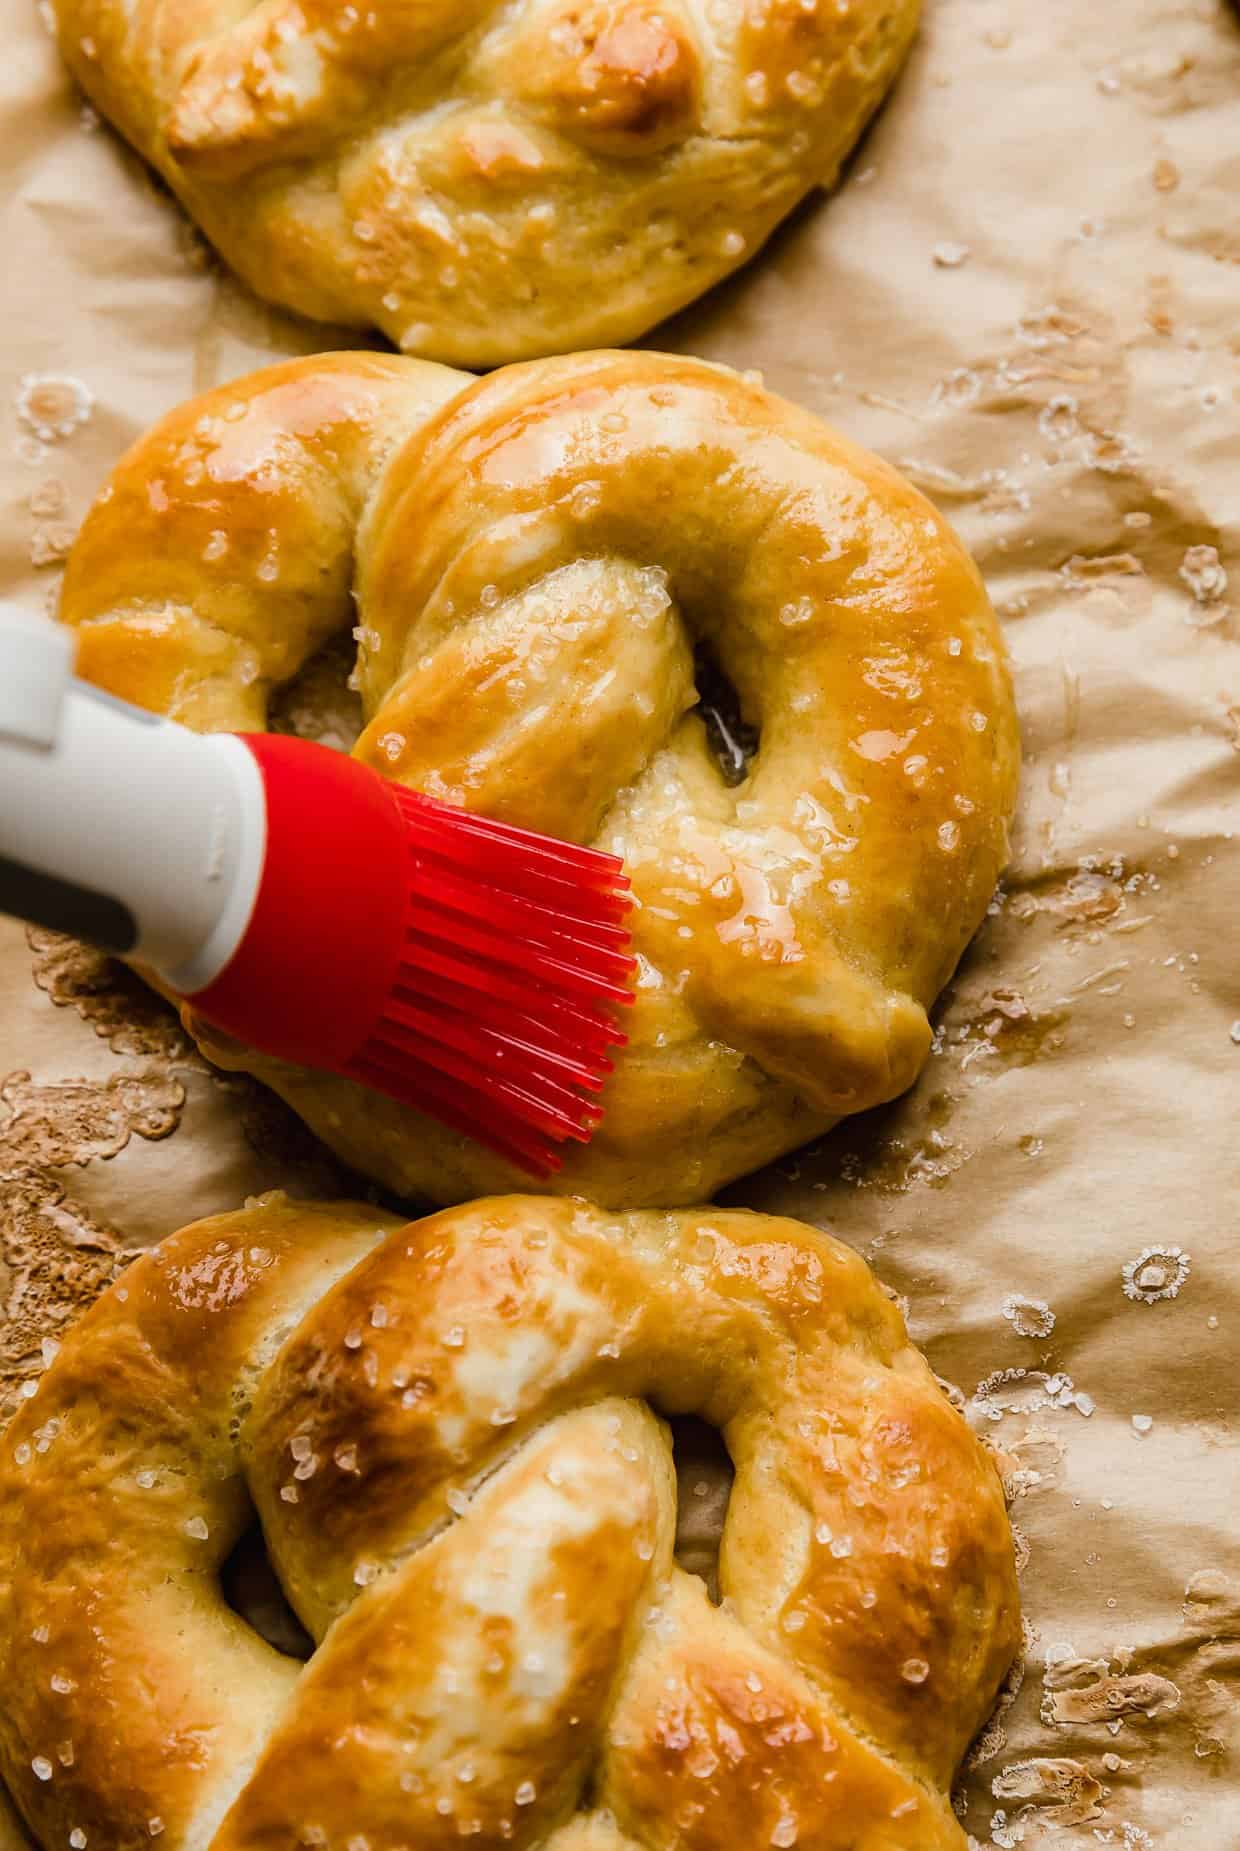 A red pastry brush spreading melted butter over a golden baked pretzel.